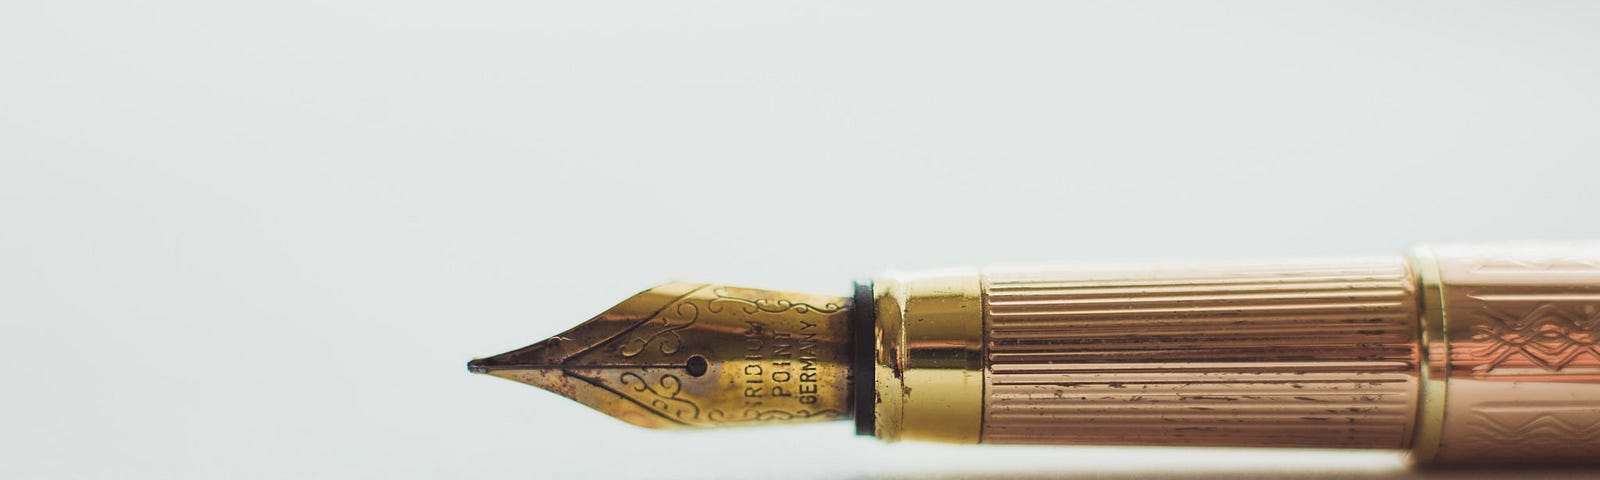 A old fashioned fountain pen lying on its side